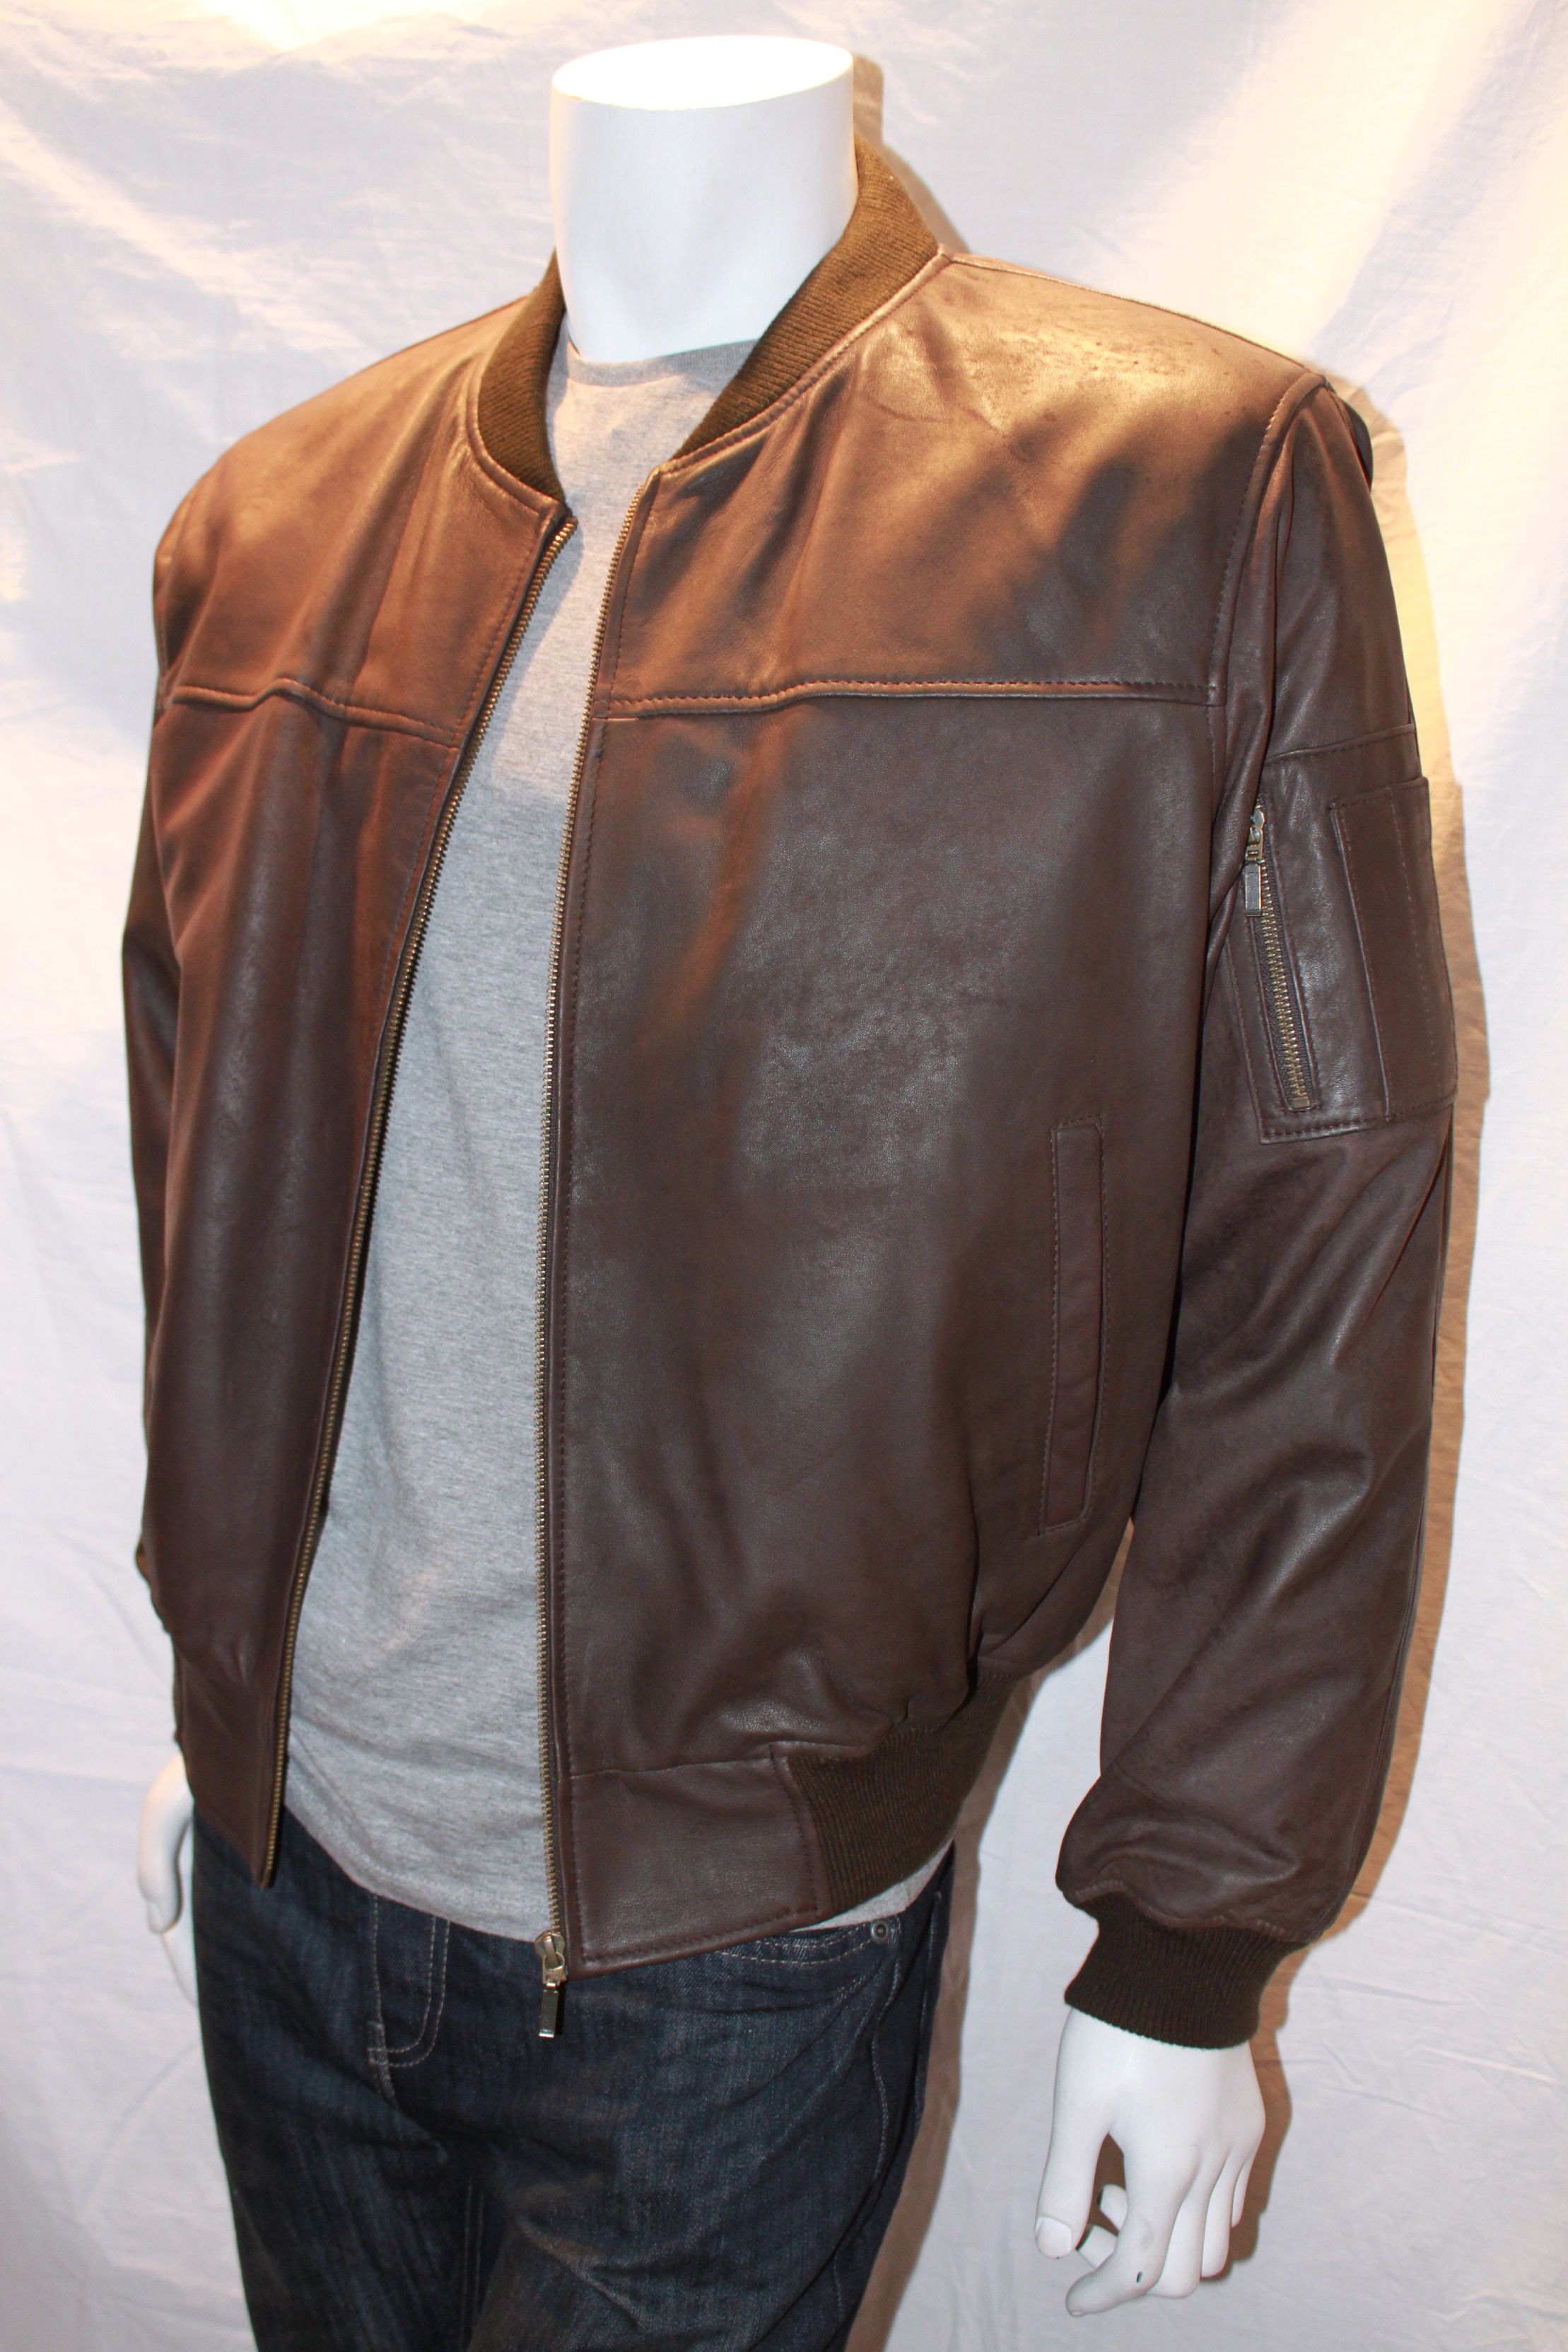 Men's MA1 Leather Bomber Jacket - available in Brown Snuff